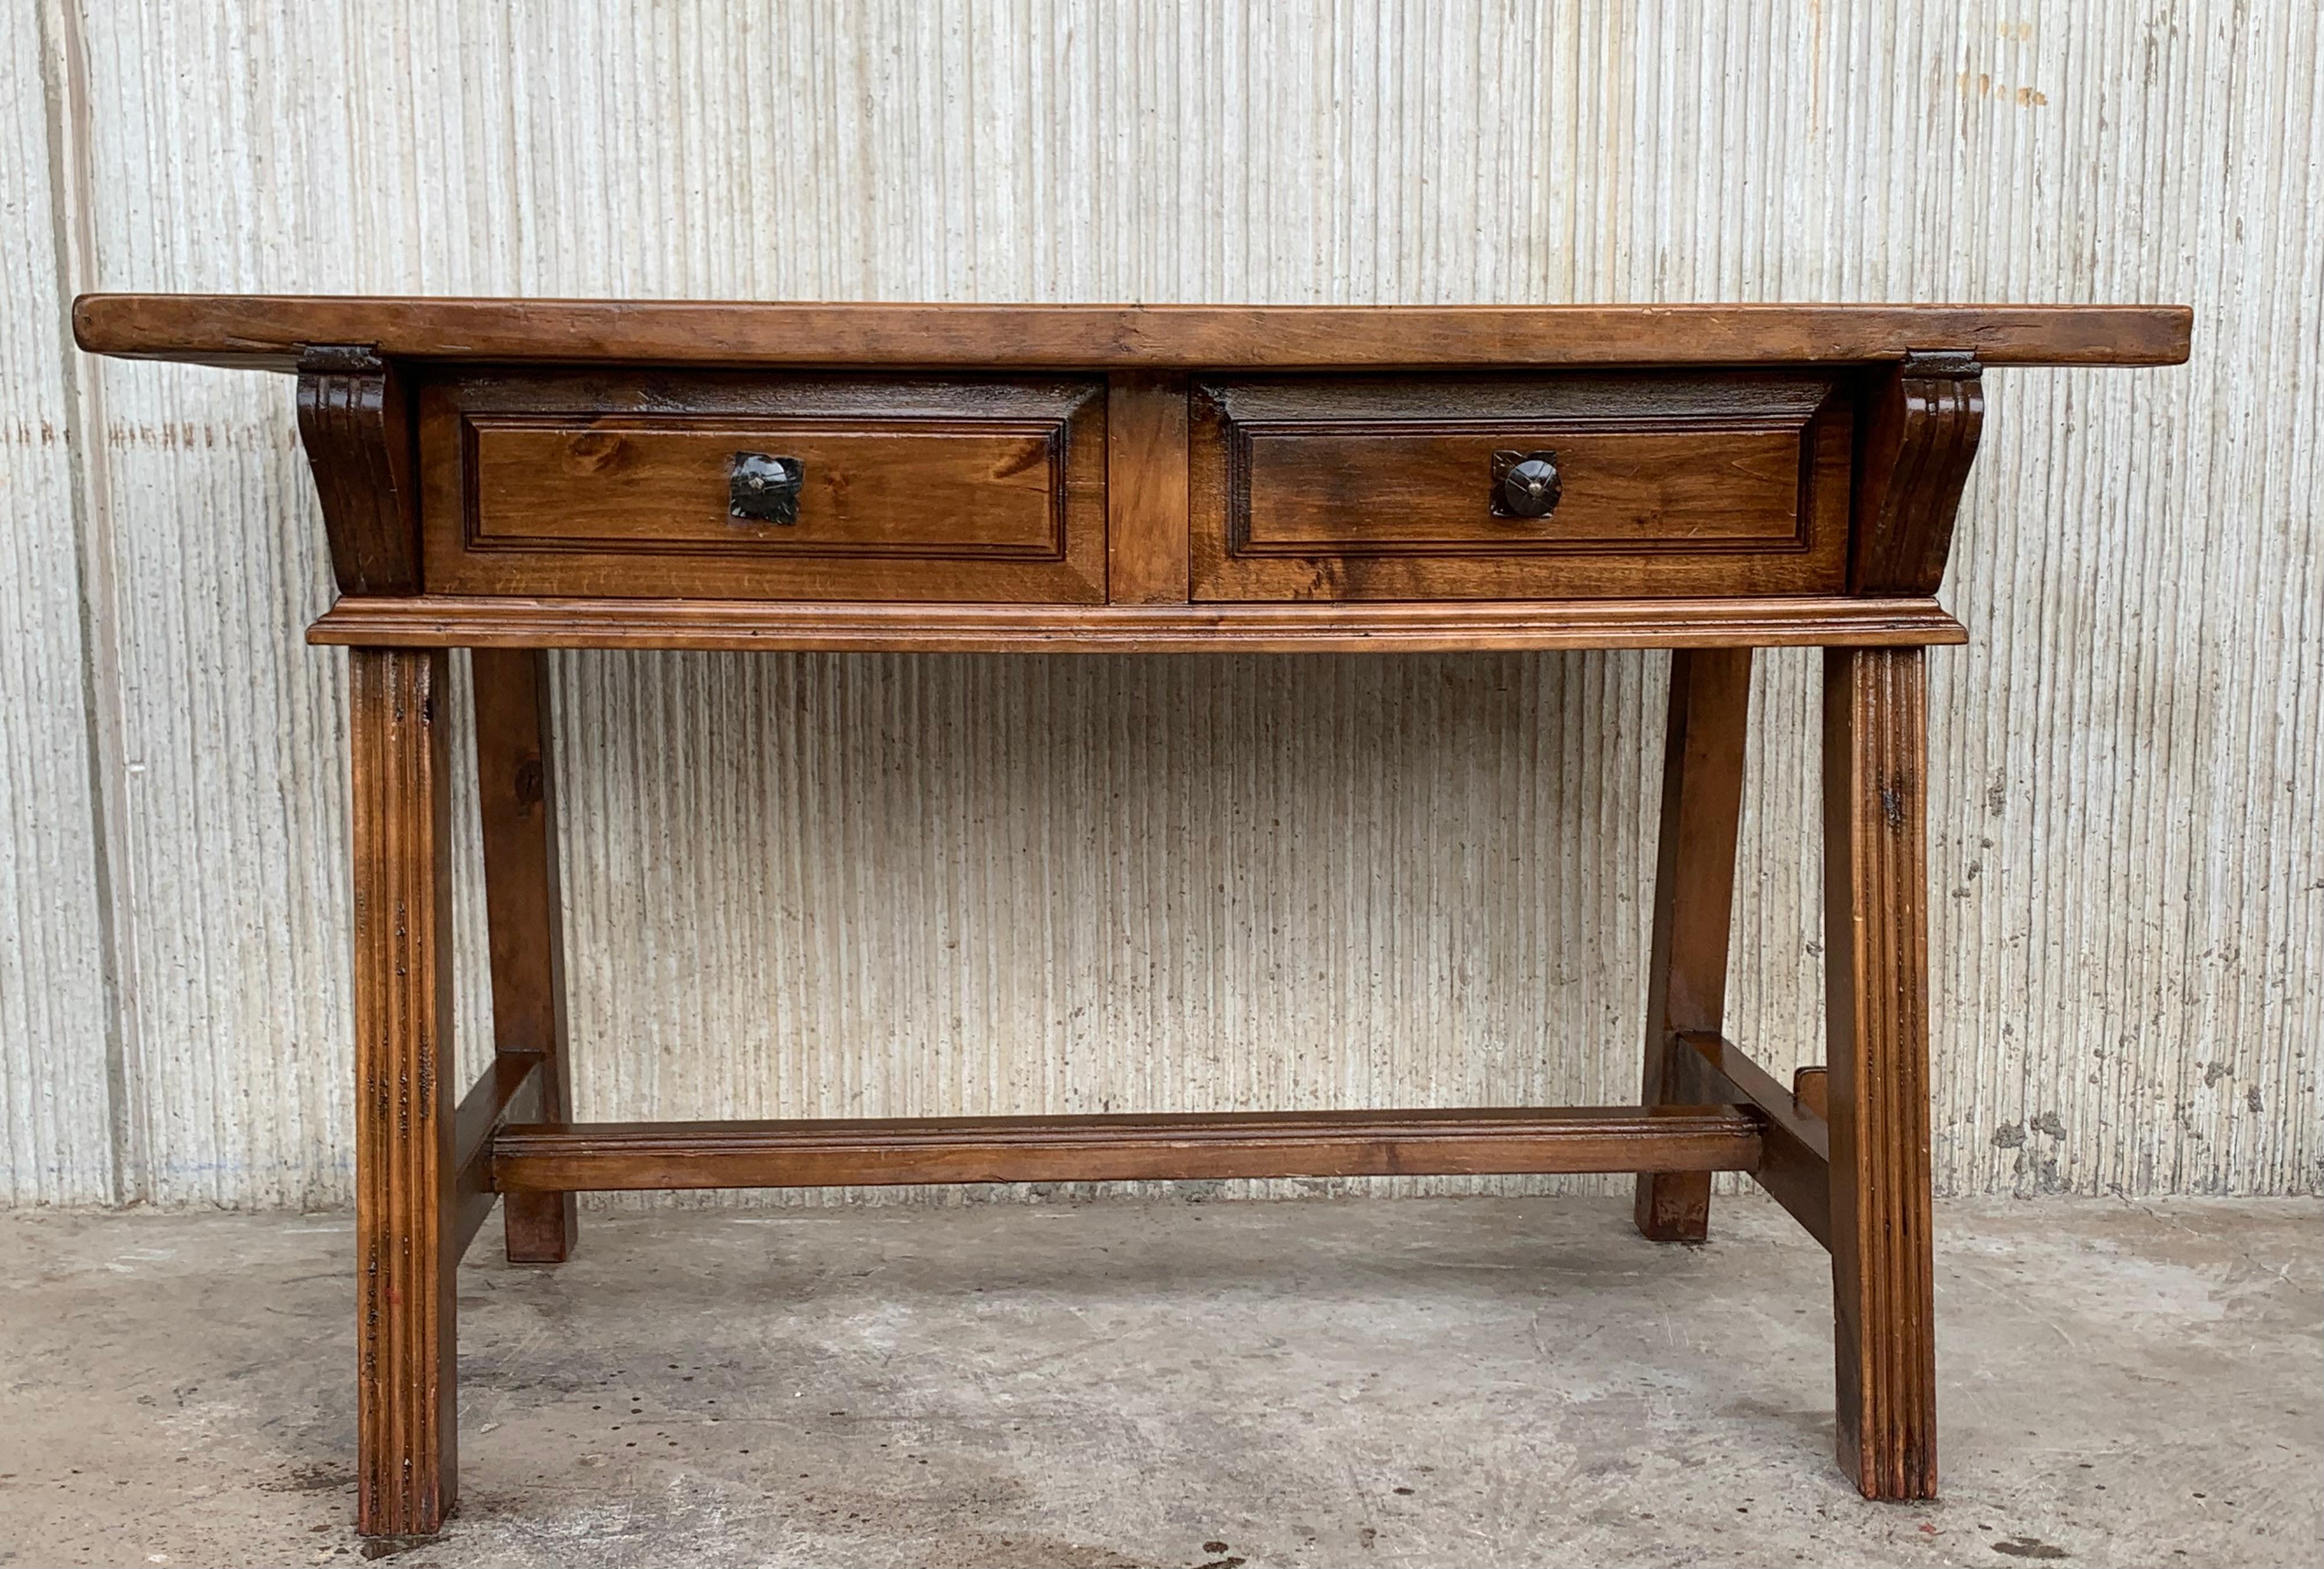 An 19th century Spanish baroque desk, or writing table made of solid oak with lyre shaped legs joined by solid wood stretched. Two drawers with original iron drawer pulls. The top is made from a single plank of oak and is slightly warped. Beautiful